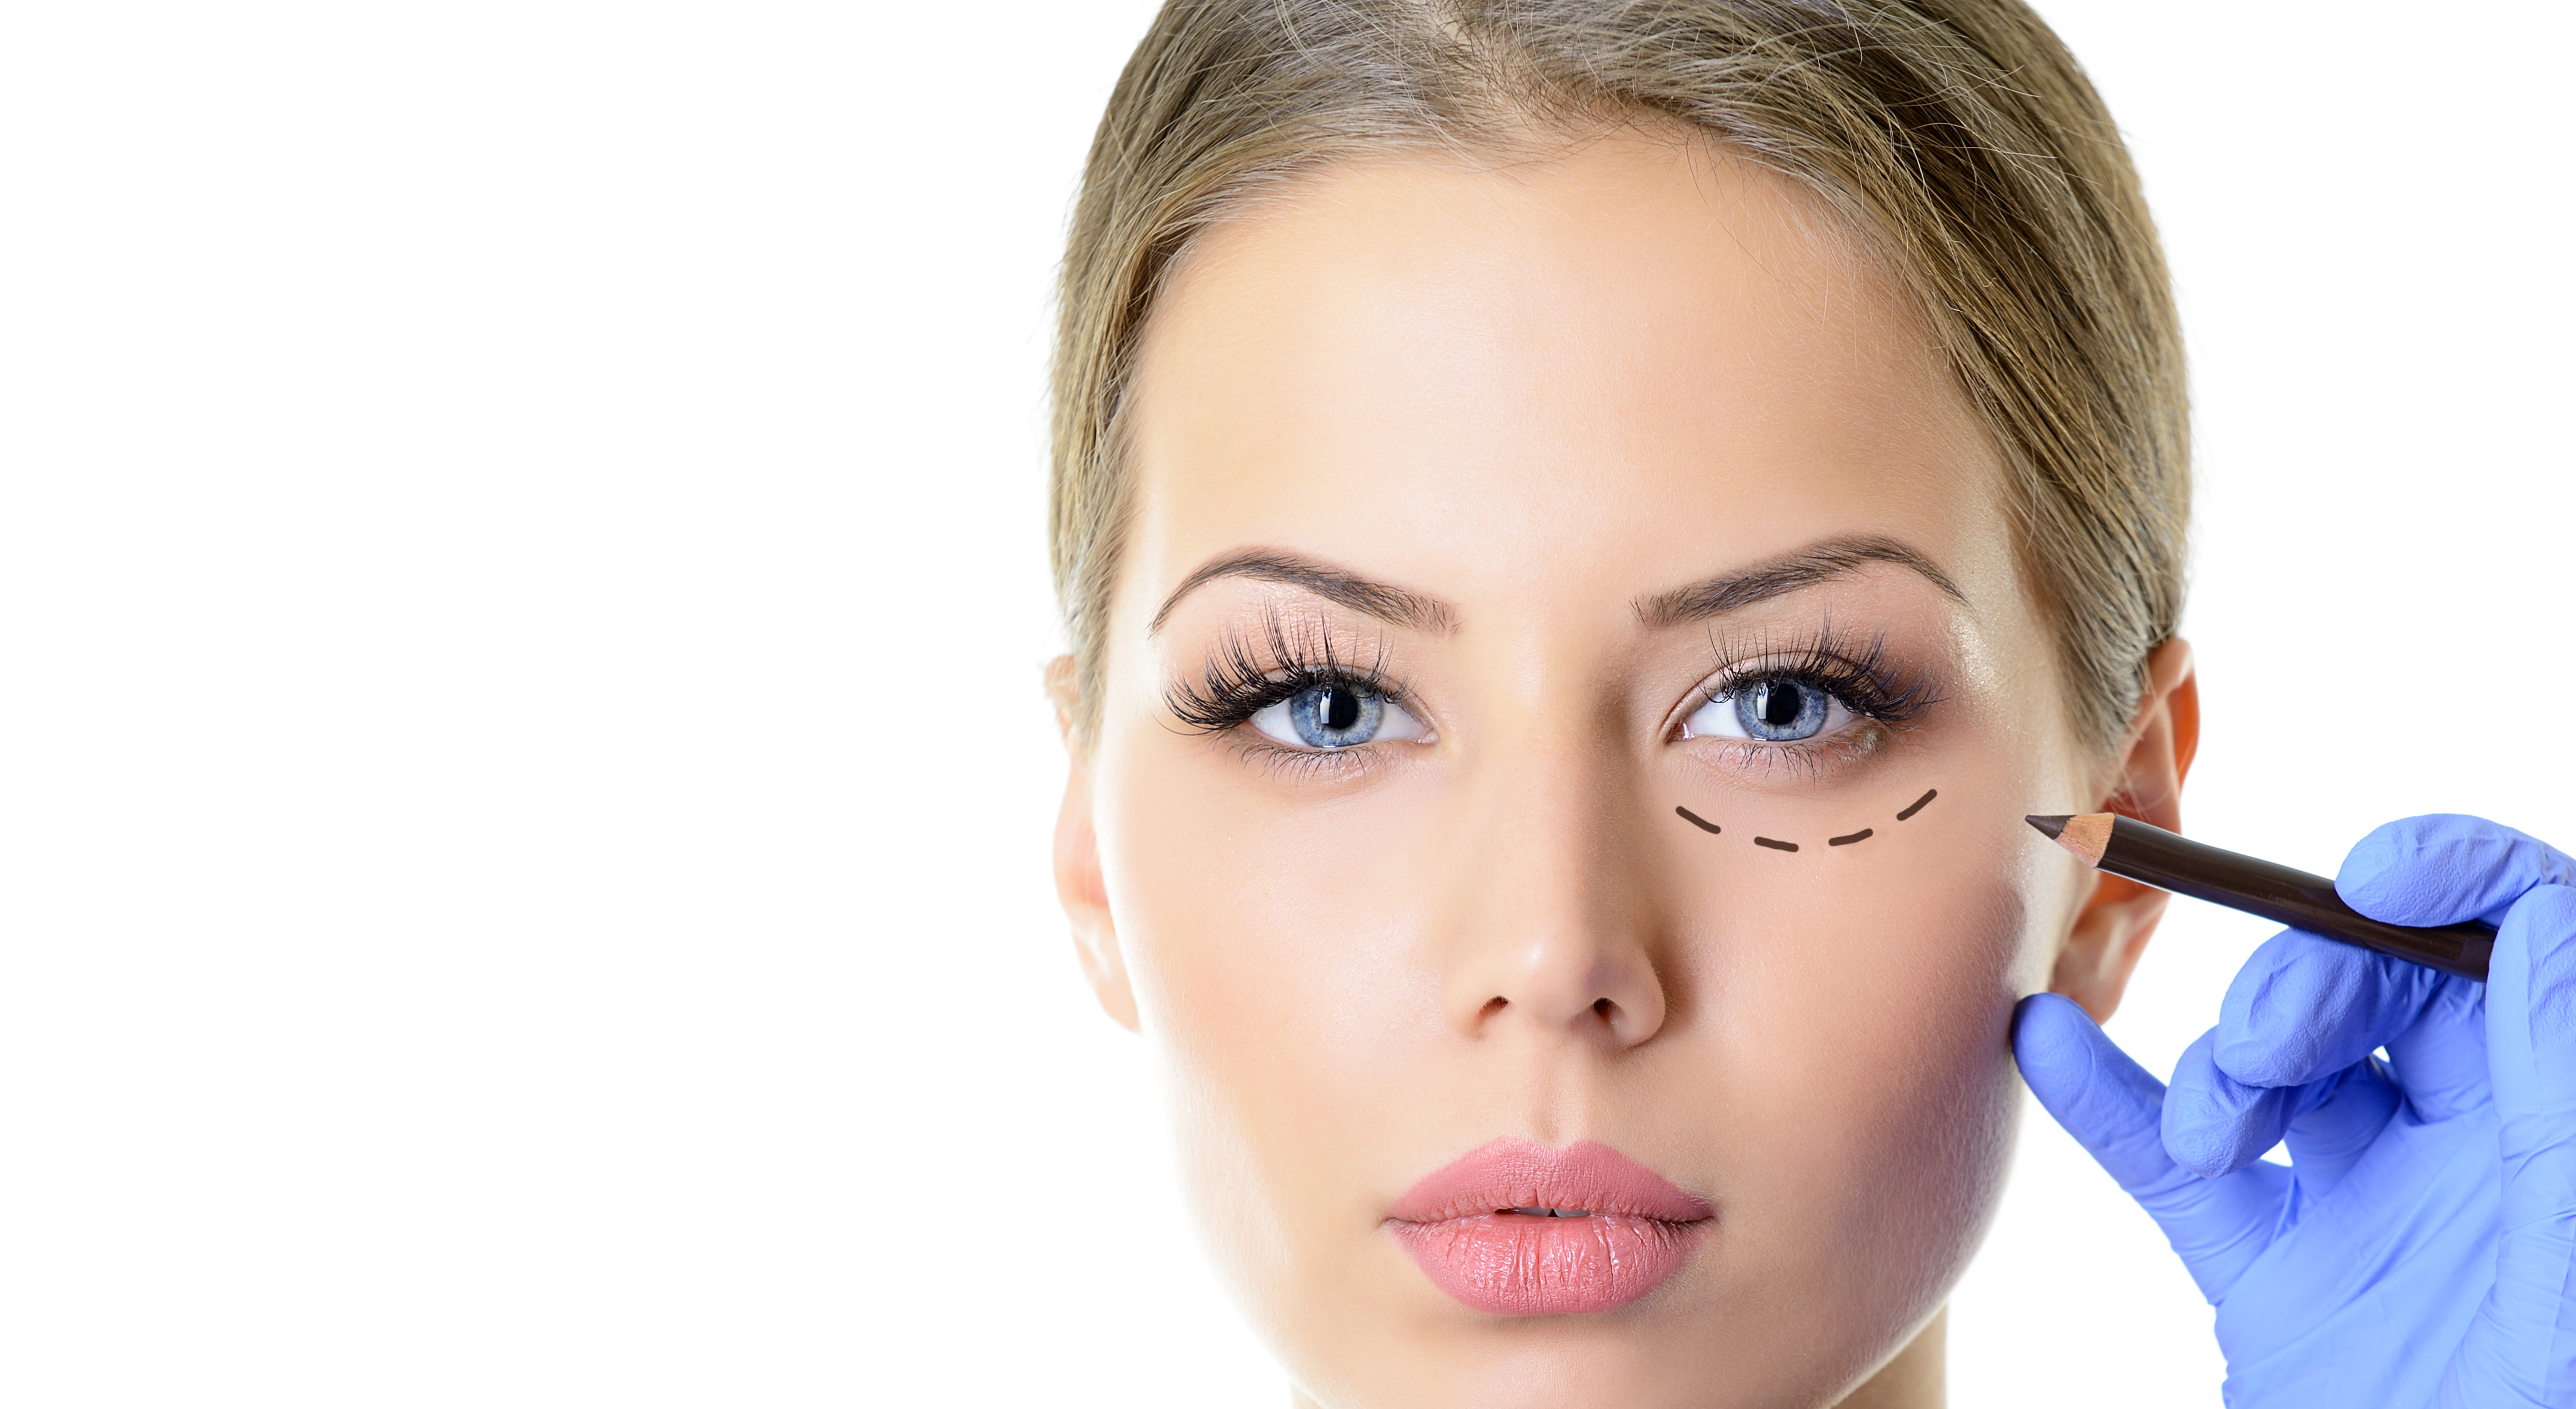 7 Things That Make You a Good Candidate for Plastic Surgery